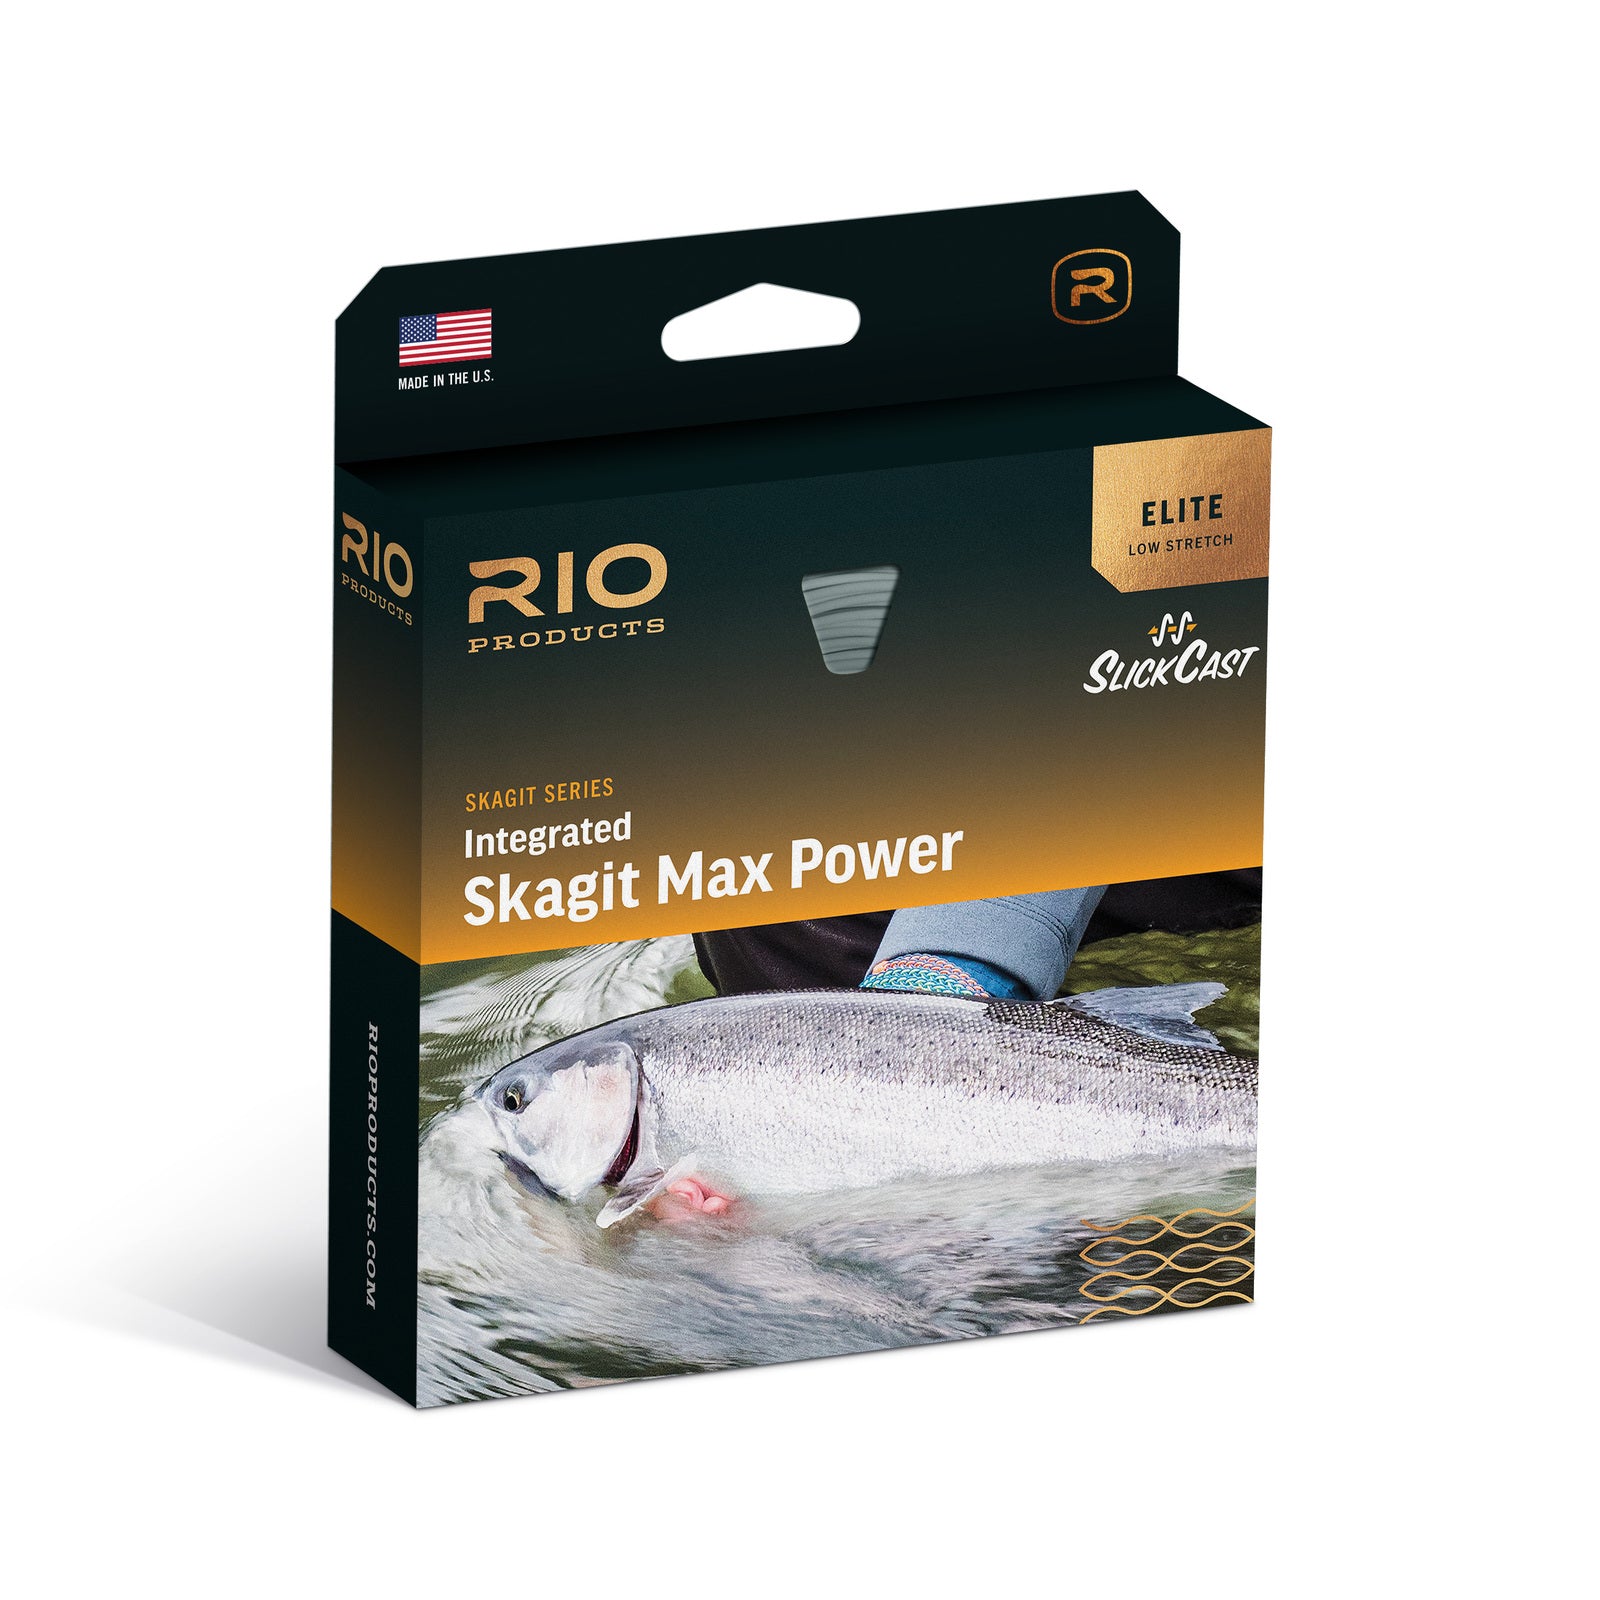 RIO Elite Integrated Trout Spey Fly Line - NEW!